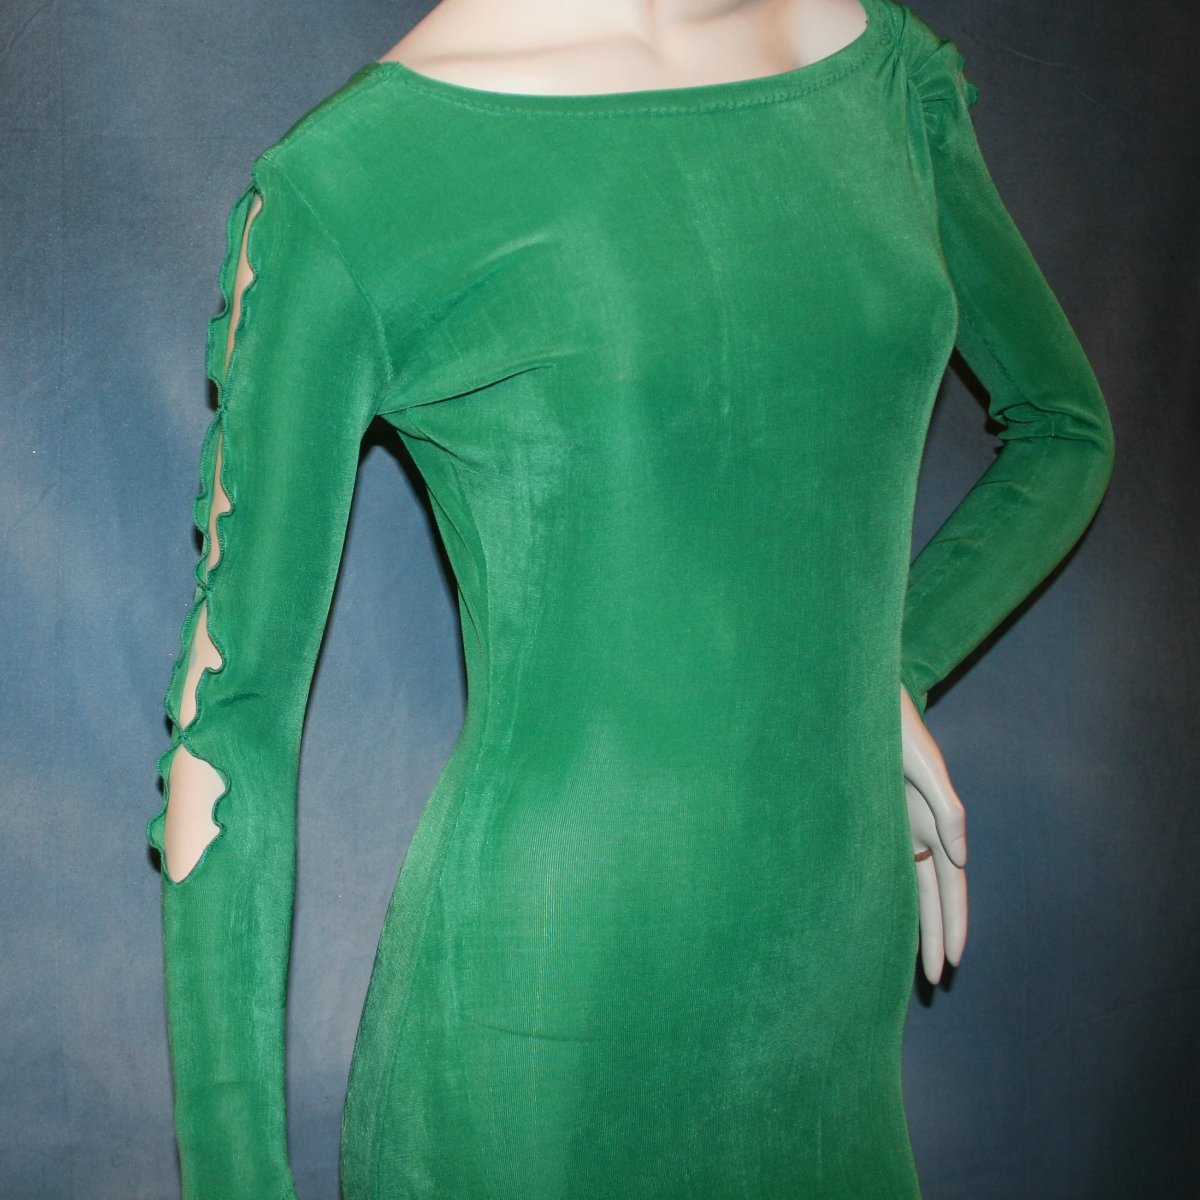 close upper view of Gorgeous green ballroom dress created in luxurious solid slinky fabric with printed chiffon of greens, with gold accents insets. Very full around bottom...can be a beginner ballroom dancer smooth or standard dress.